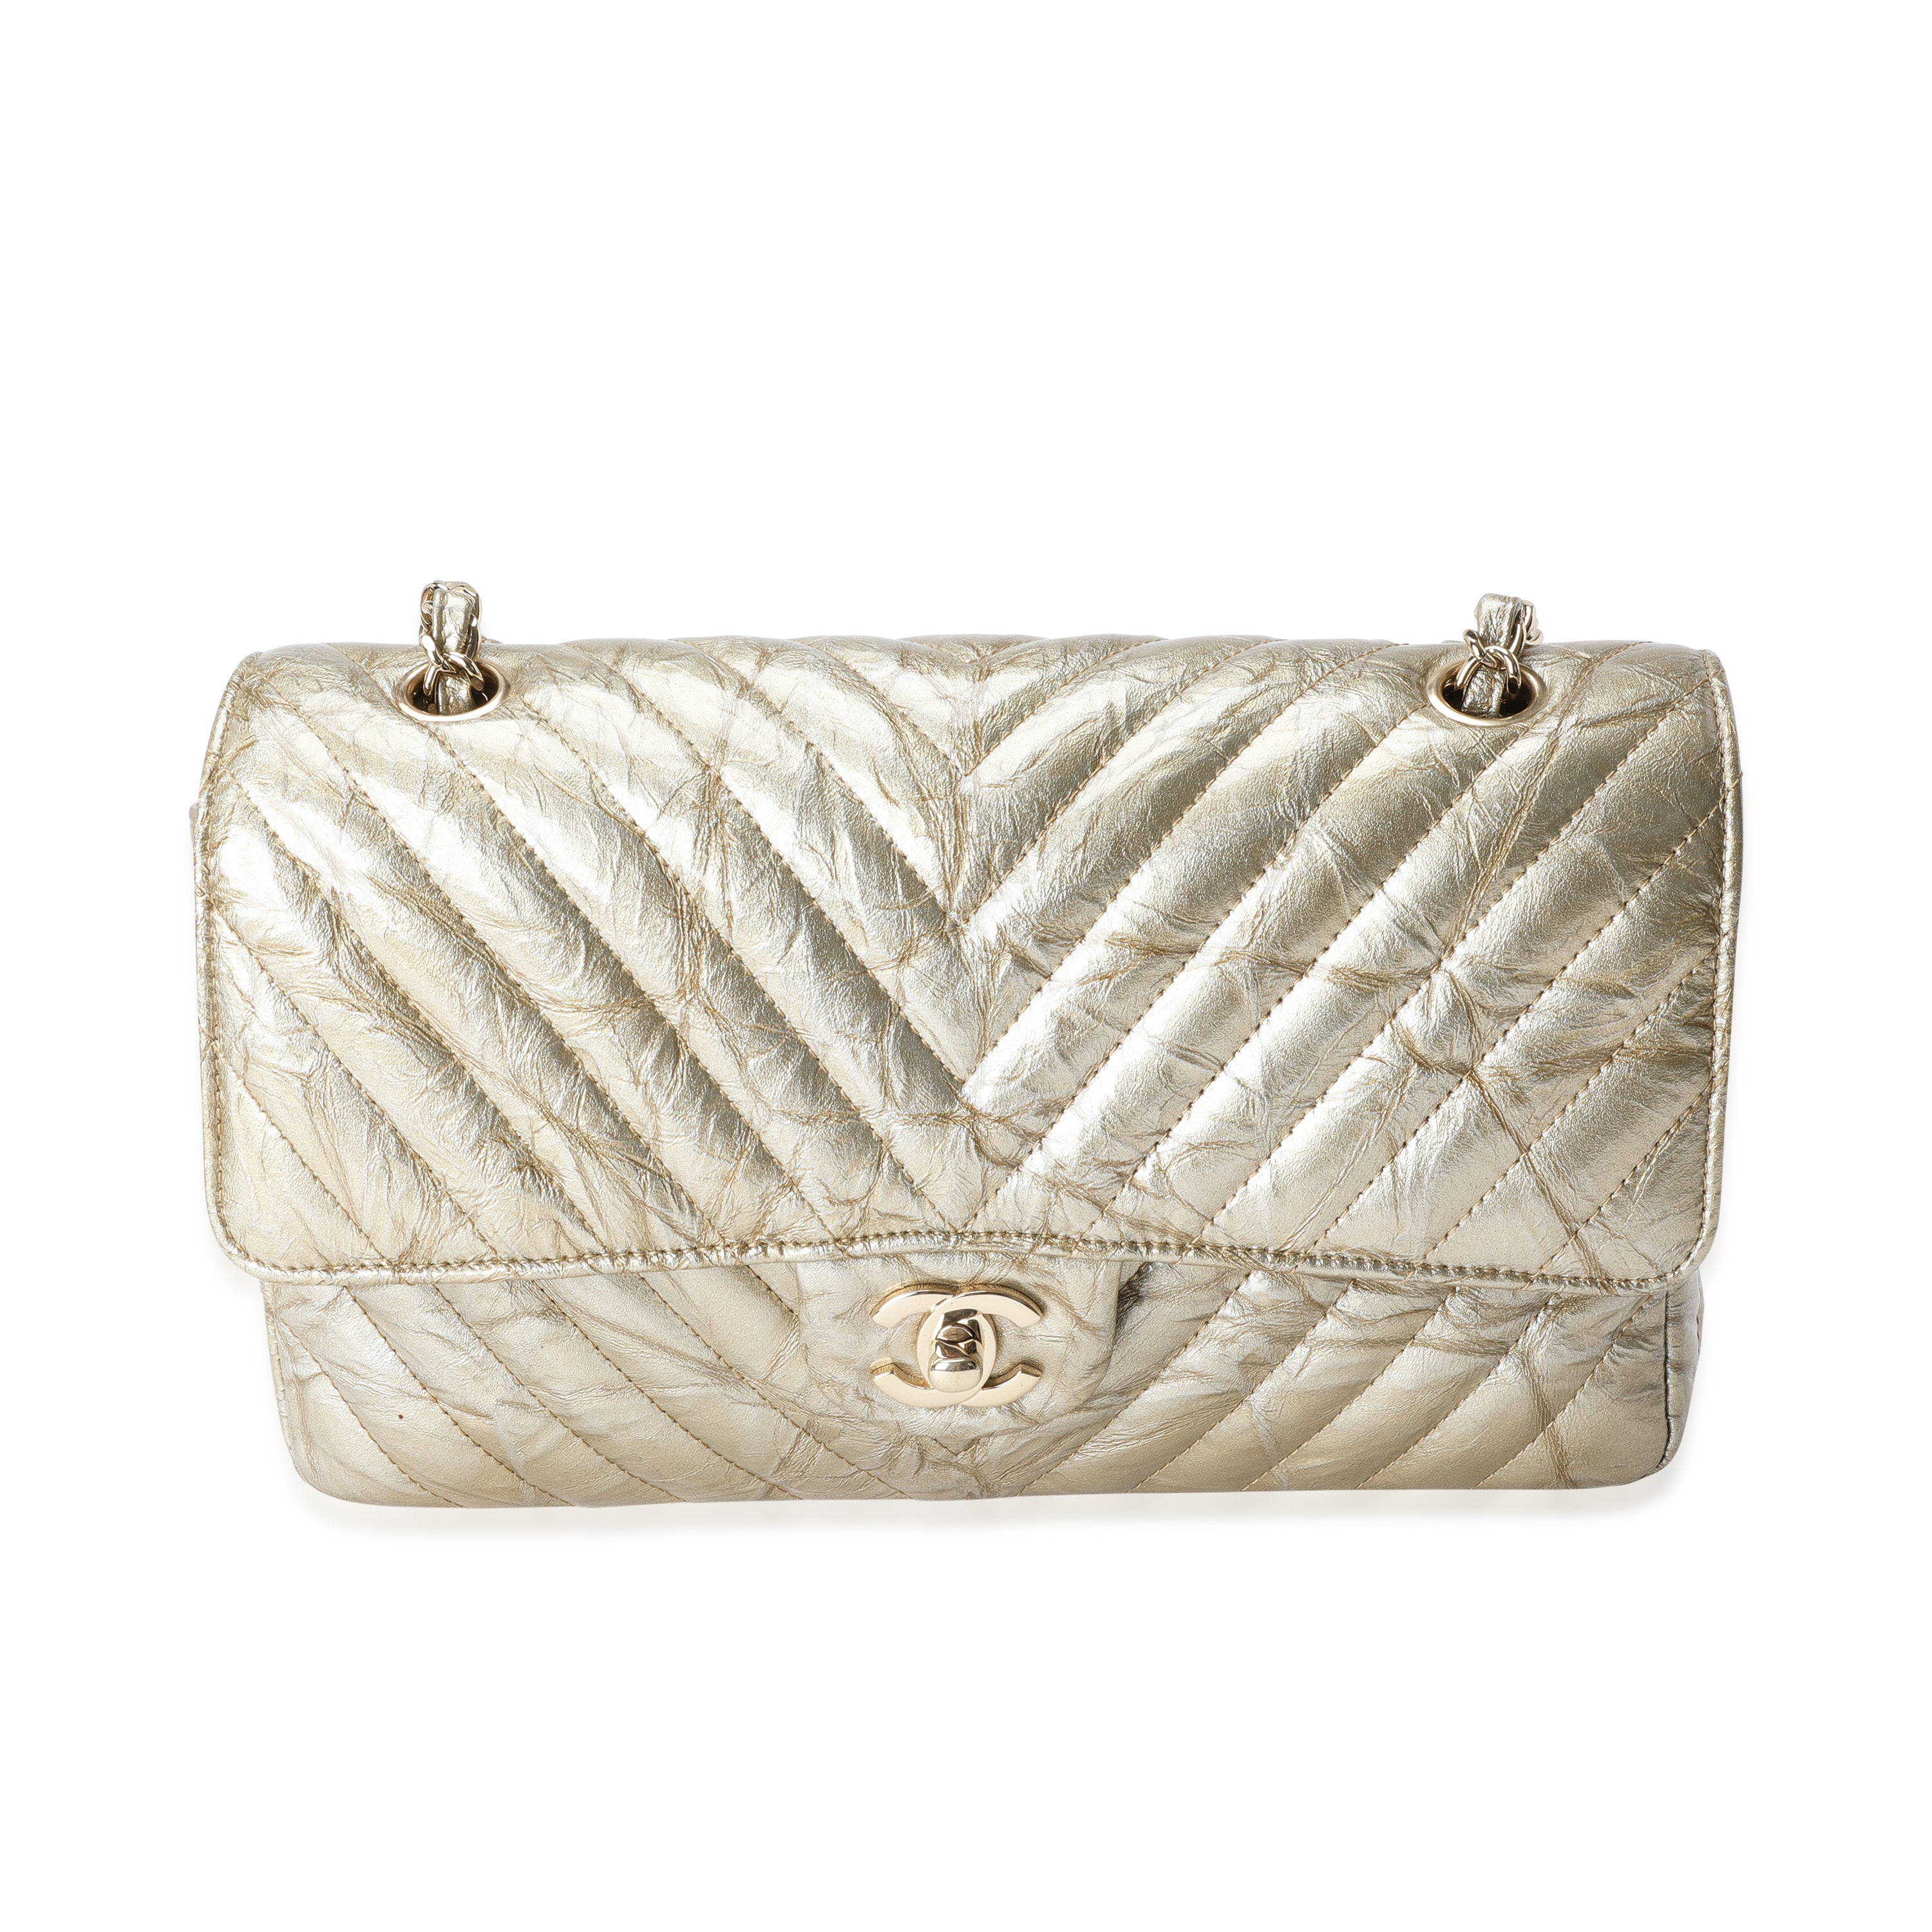 Chanel Gold Chevron Quilted Patent Leather Medium Classic Double Flap Bag, myGemma